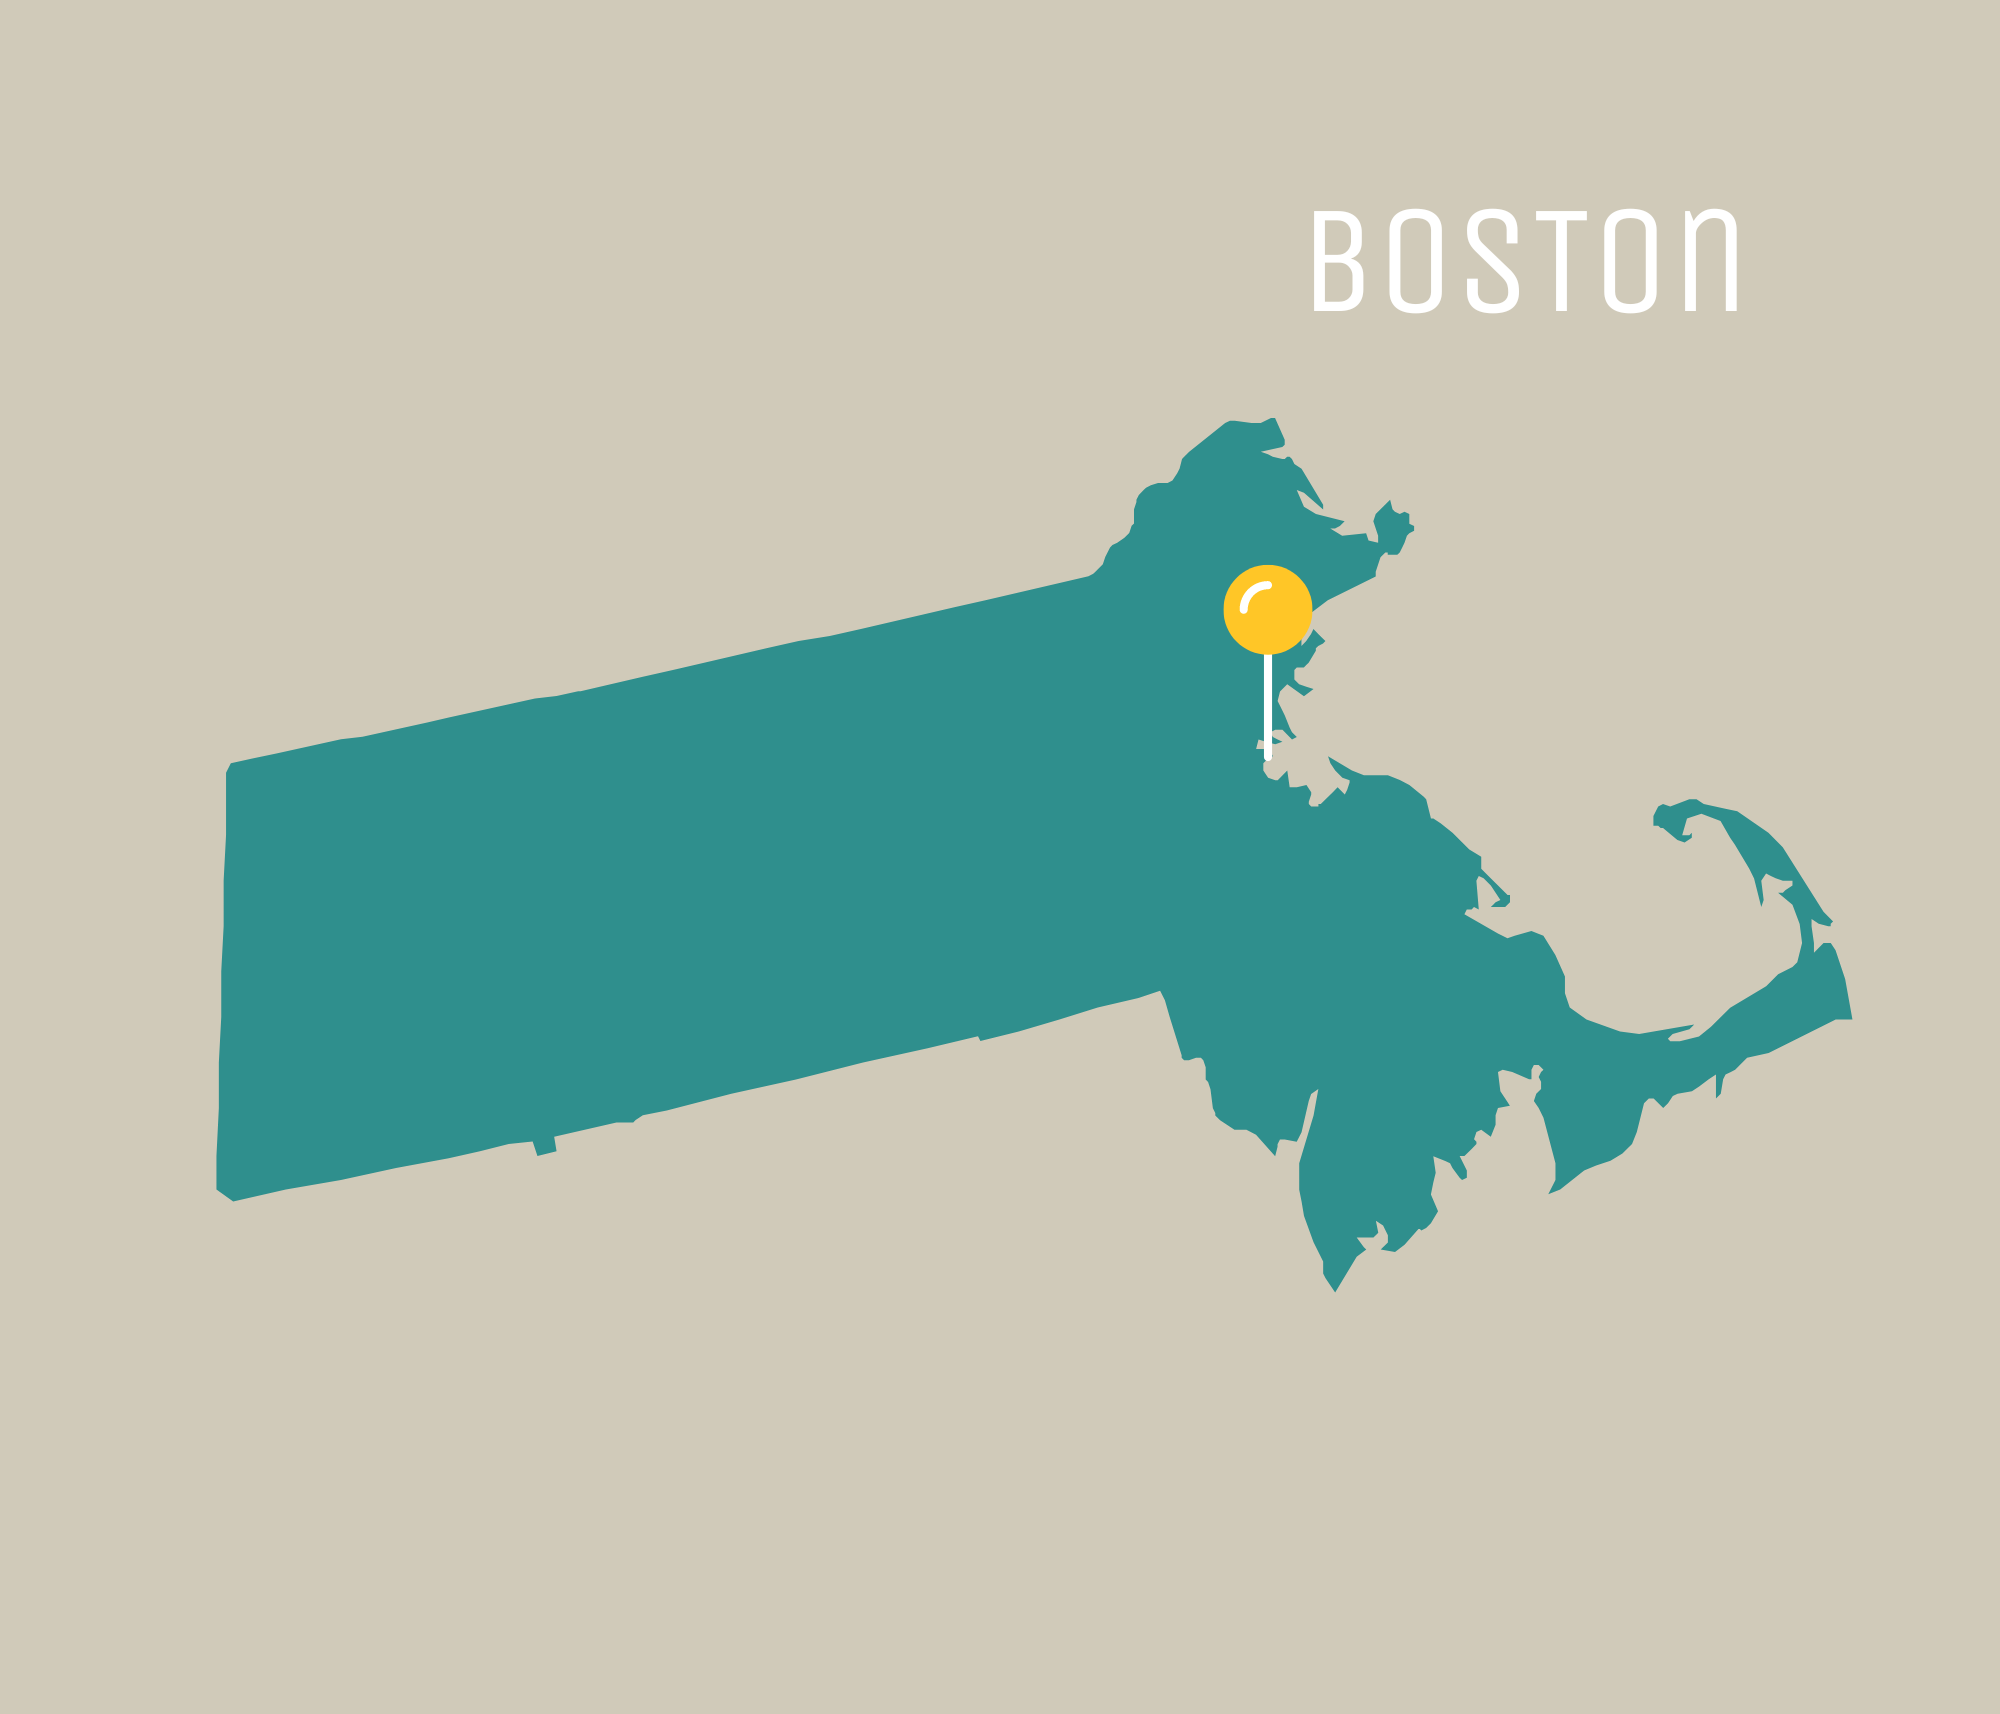 Yellow pin in the state of Massachusetts where Boston is